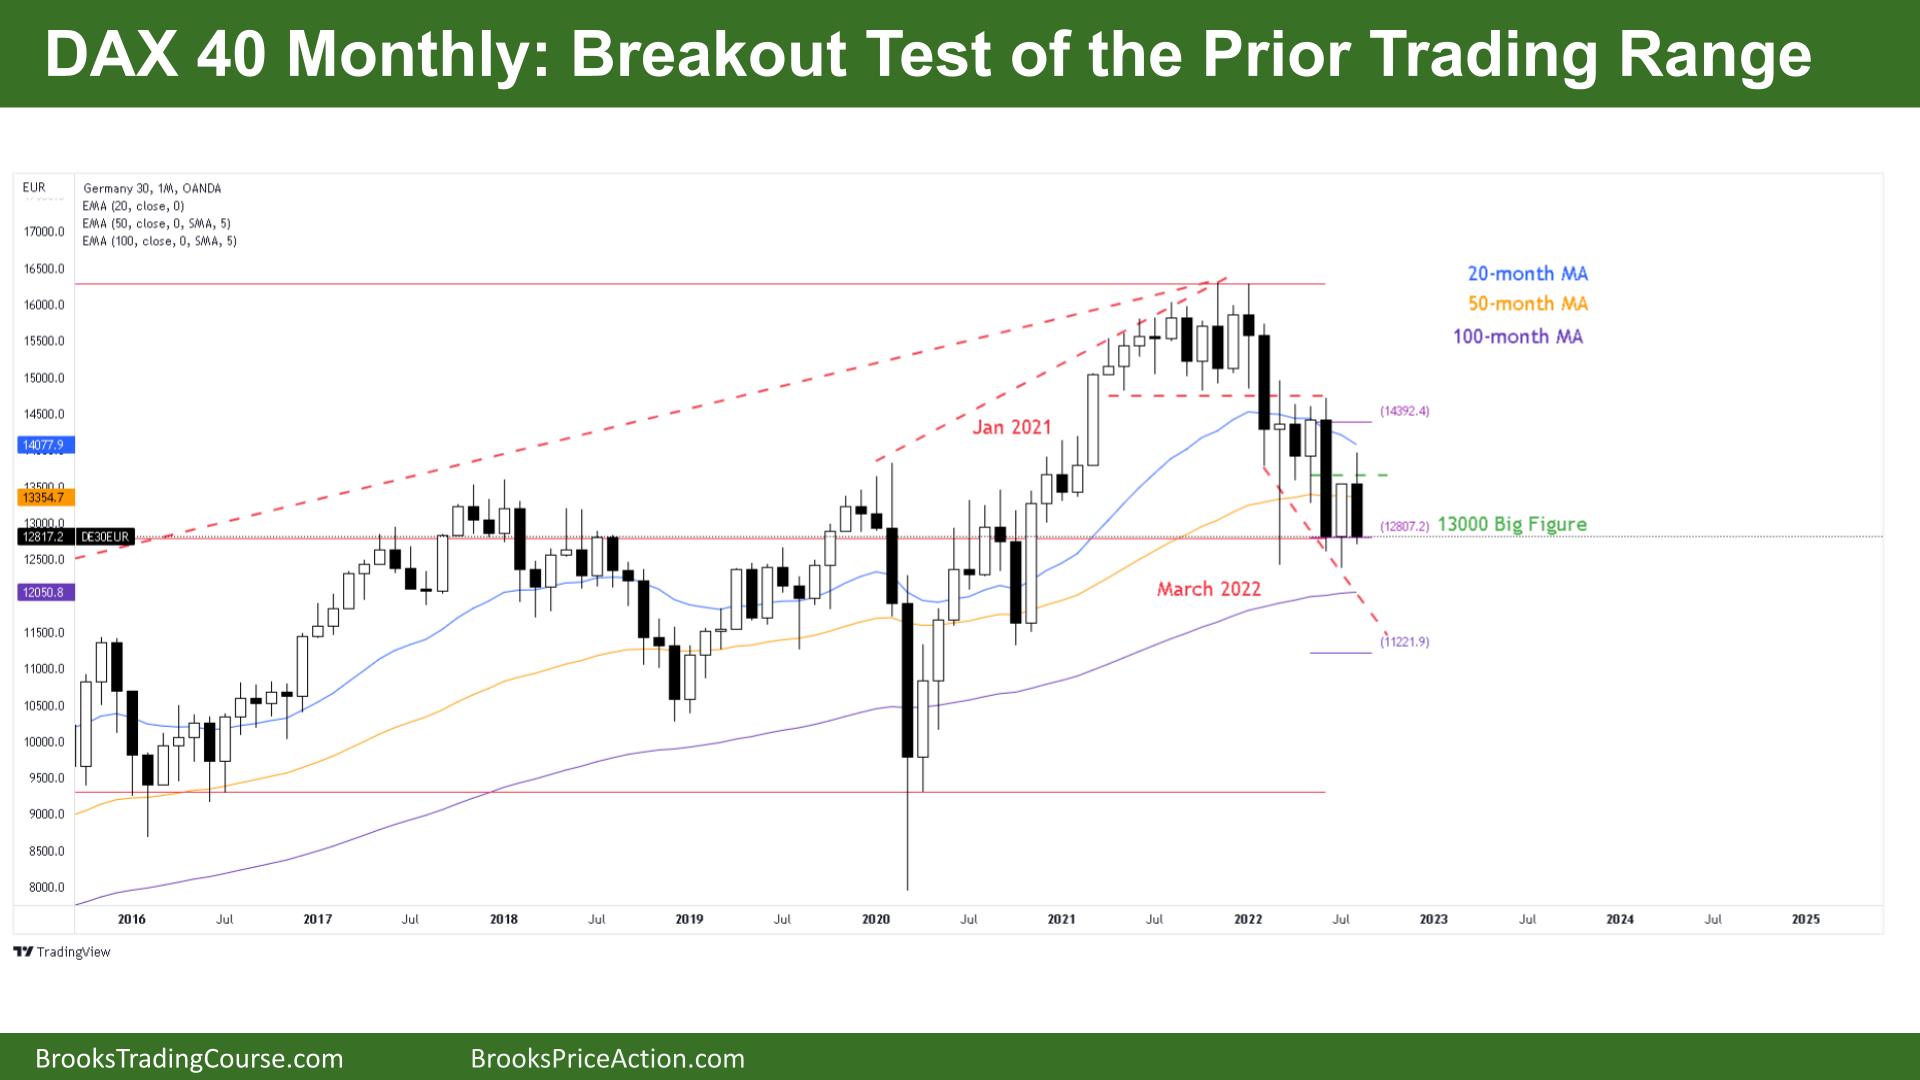 DAX 40 Breakout Test of the Prior Trading Range